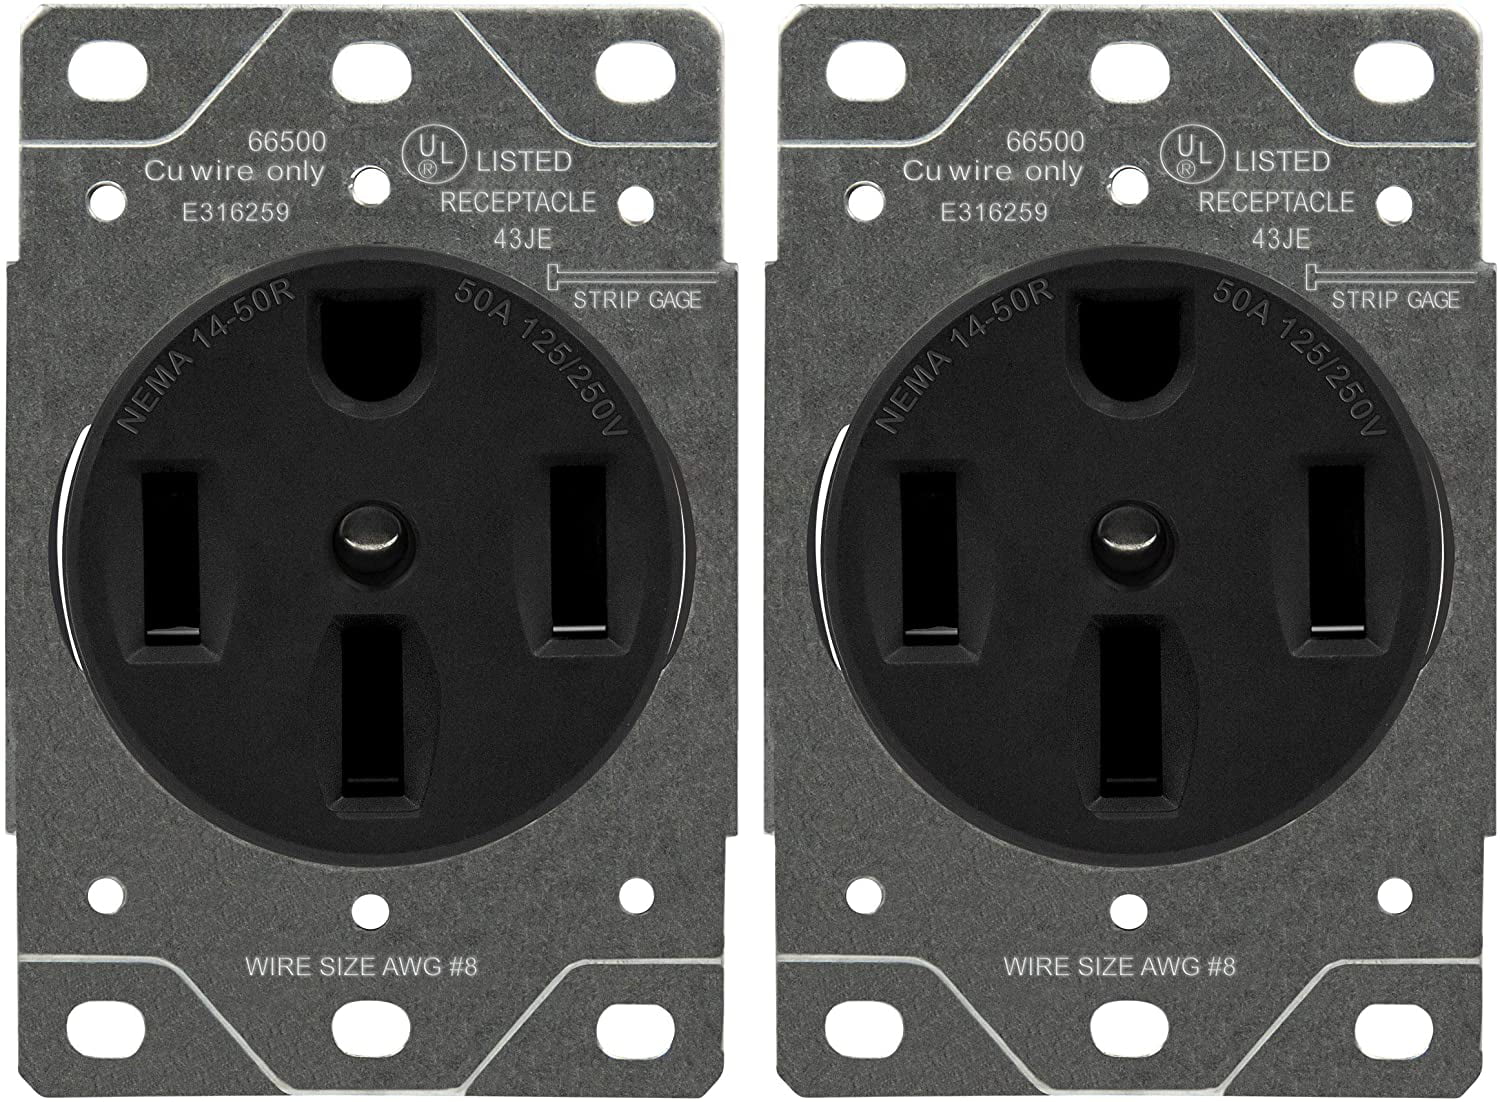 Enerlites 50 Amp Receptacle Outlet Nema 14 50r For Electric Vehicles